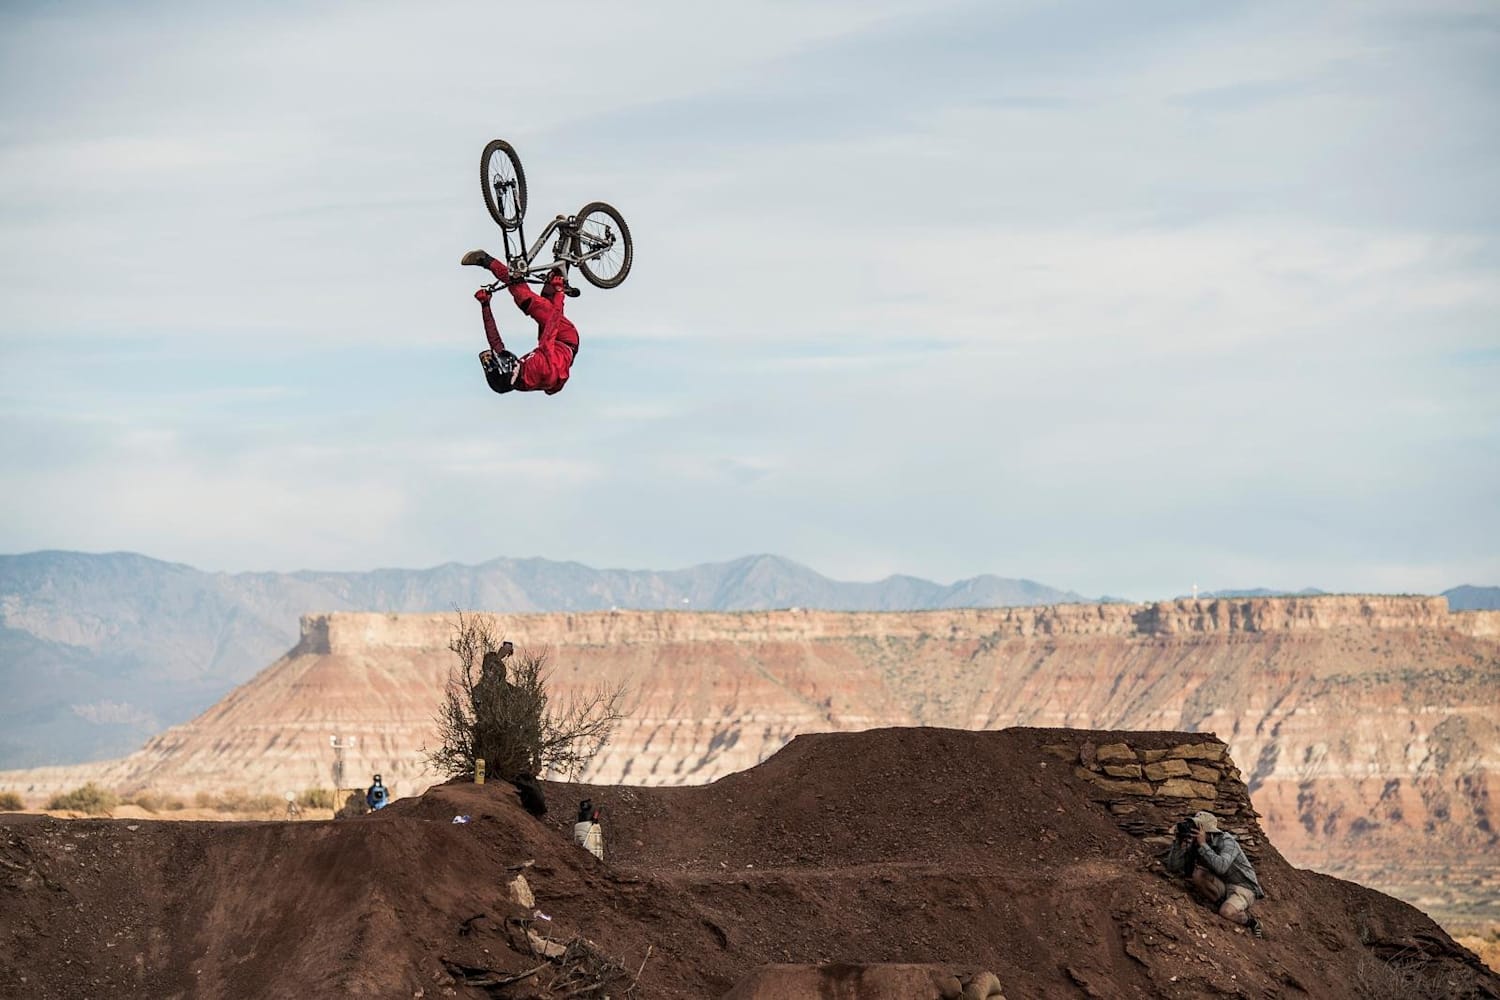 Red Bull Rampage 2016 See the Top 3 Runs